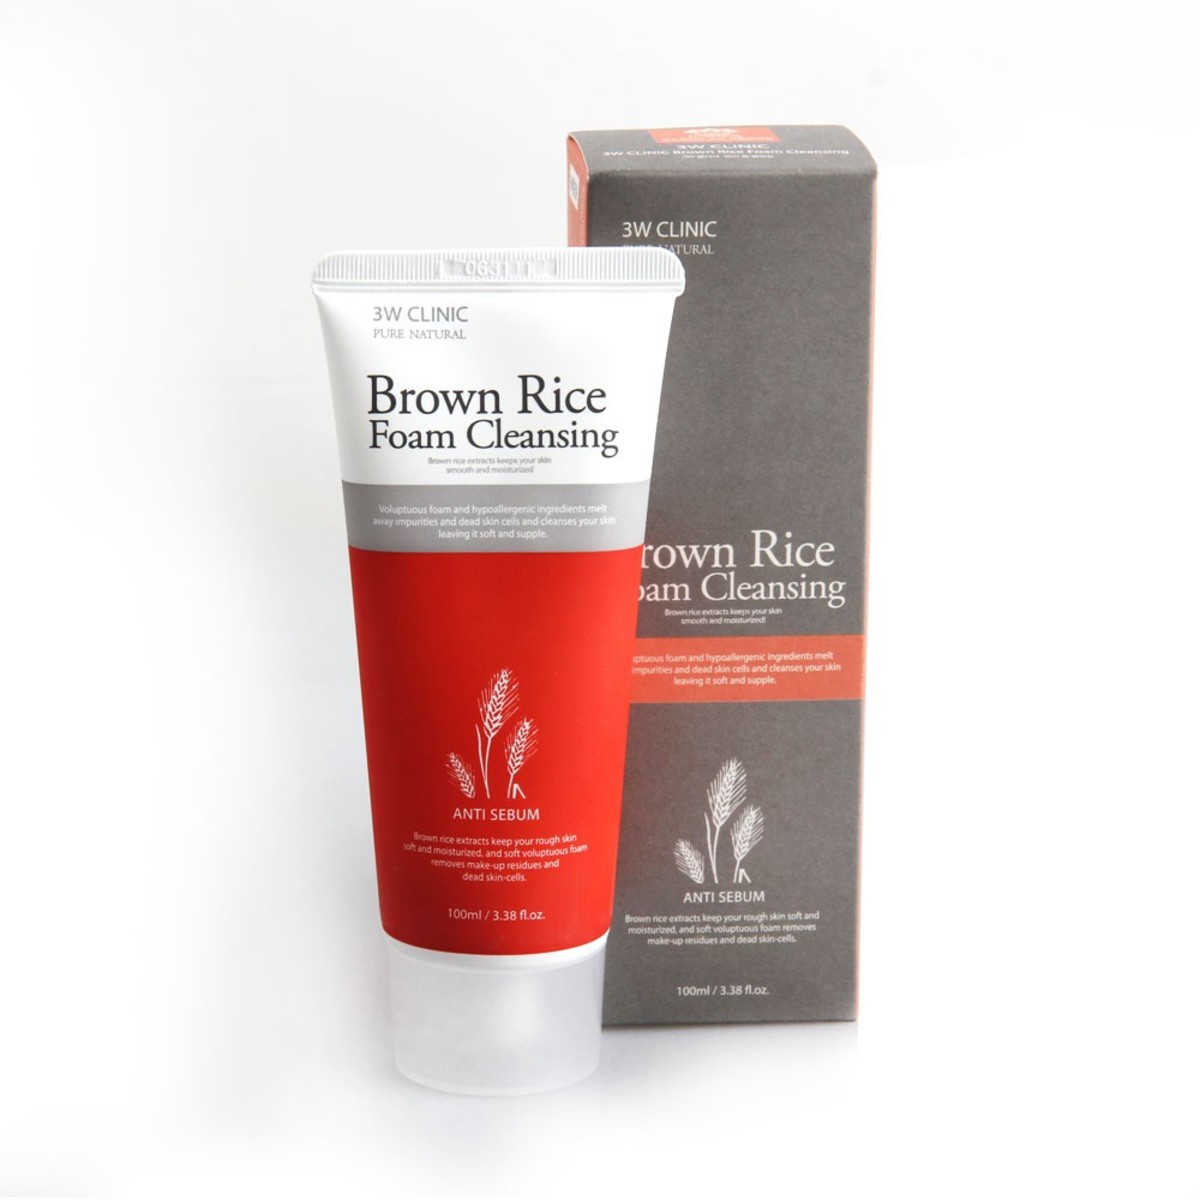 Pure Natural Brown Rice Foam Cleansing 100ml (ref:62035)